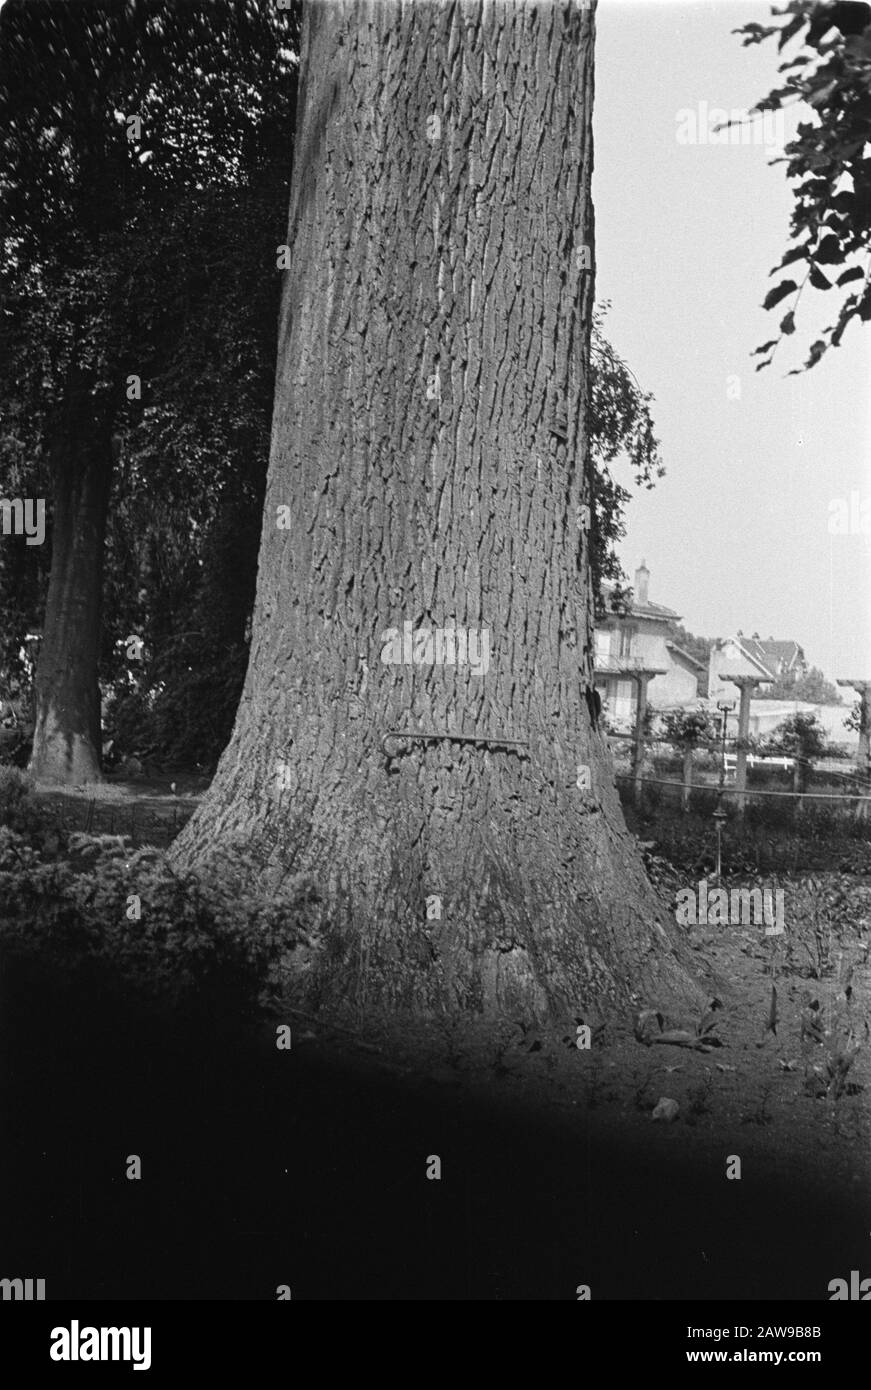 [Poplar? 60 years old] [2 meters, 5.50 meters] circumference [walking stick lying horizontally on a stem] Date: June 1934 Keywords: eugenu, poplar and willow Stock Photo